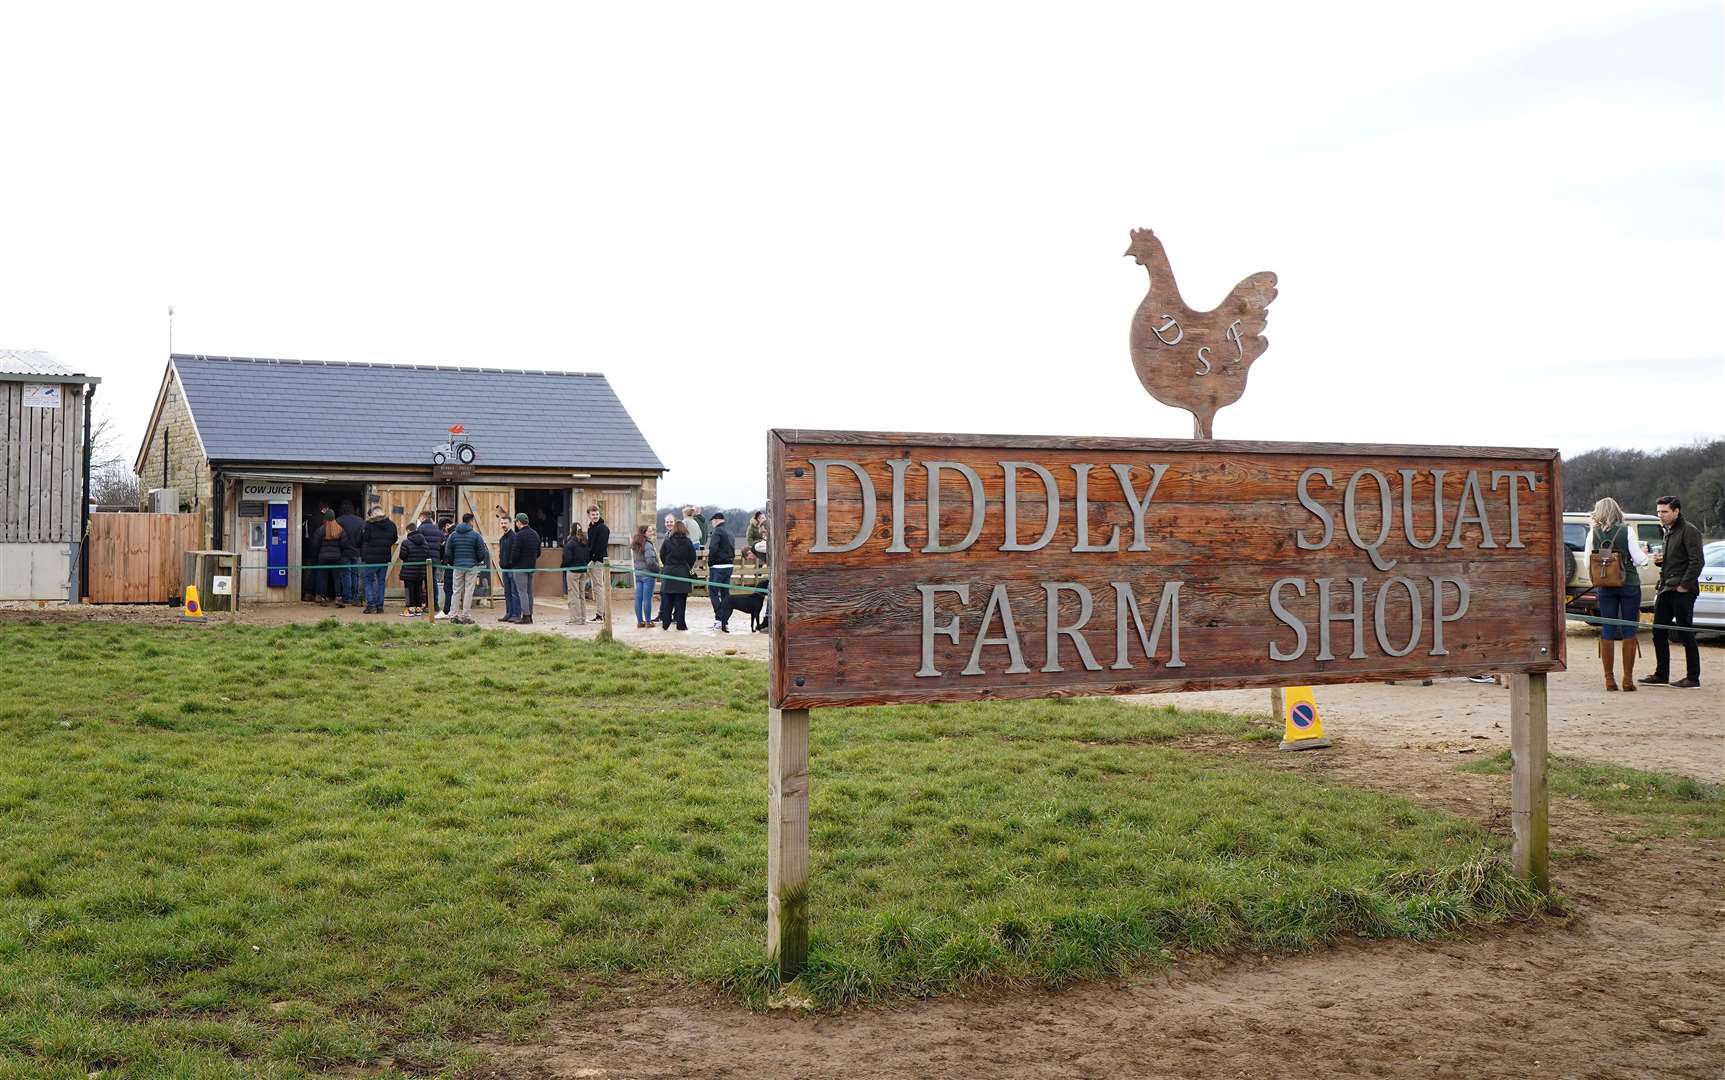 Customers queue for Jeremy Clarkson’s Diddly Squat Farm Shop near Chadlington in Oxfordshire during the opening weekend of the shop following its winter closure in February 2023 (Gareth Fuller/PA).